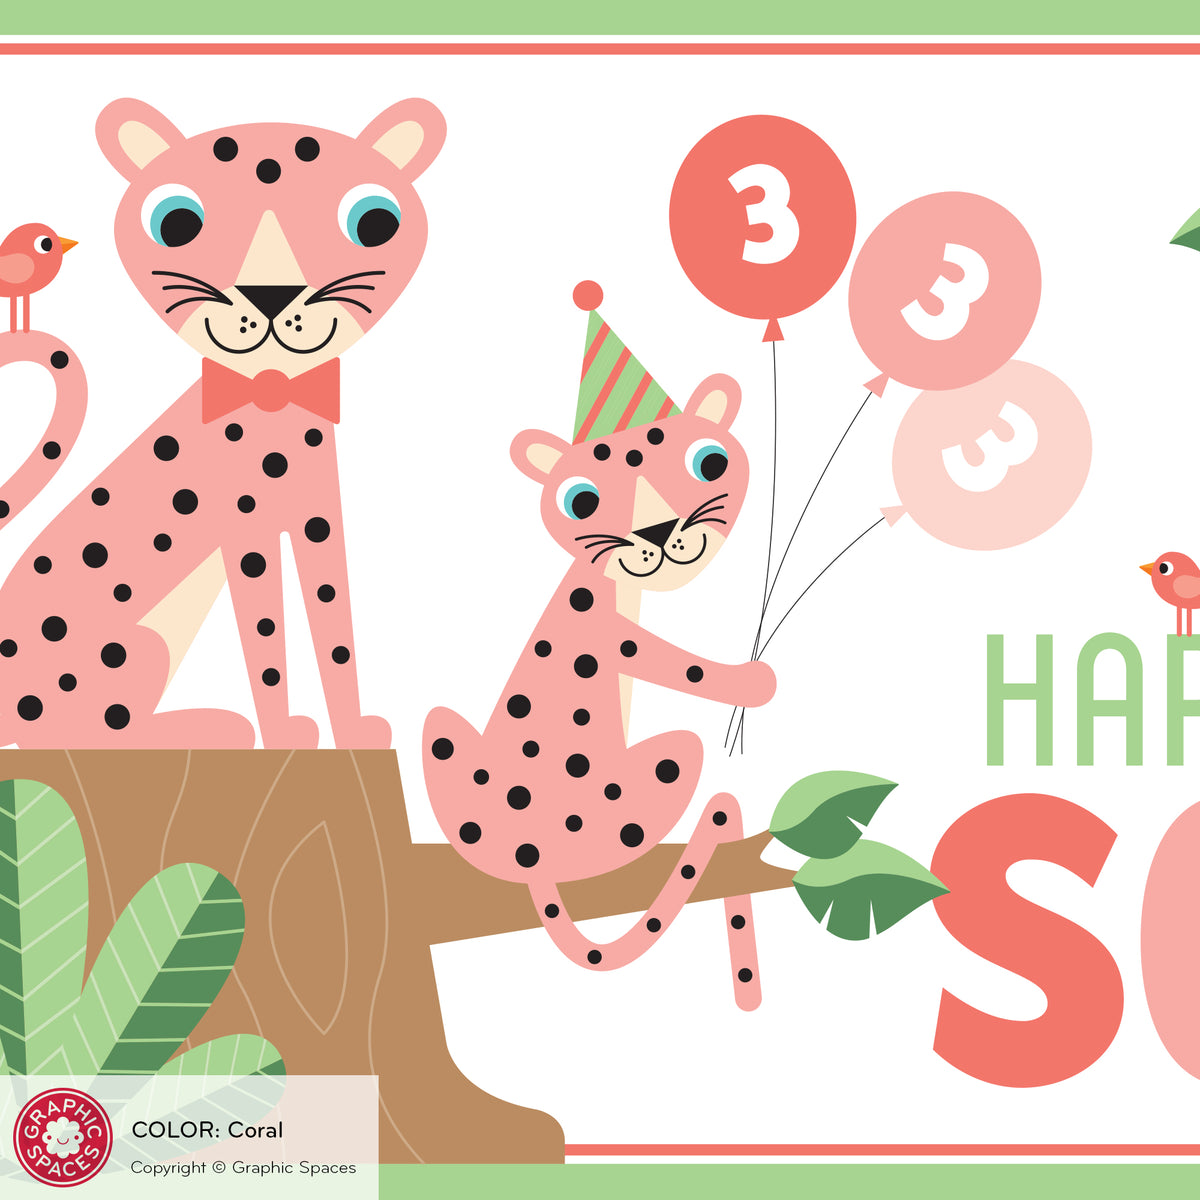 Cheetah Birthday Party Banner, Personalized - CORAL